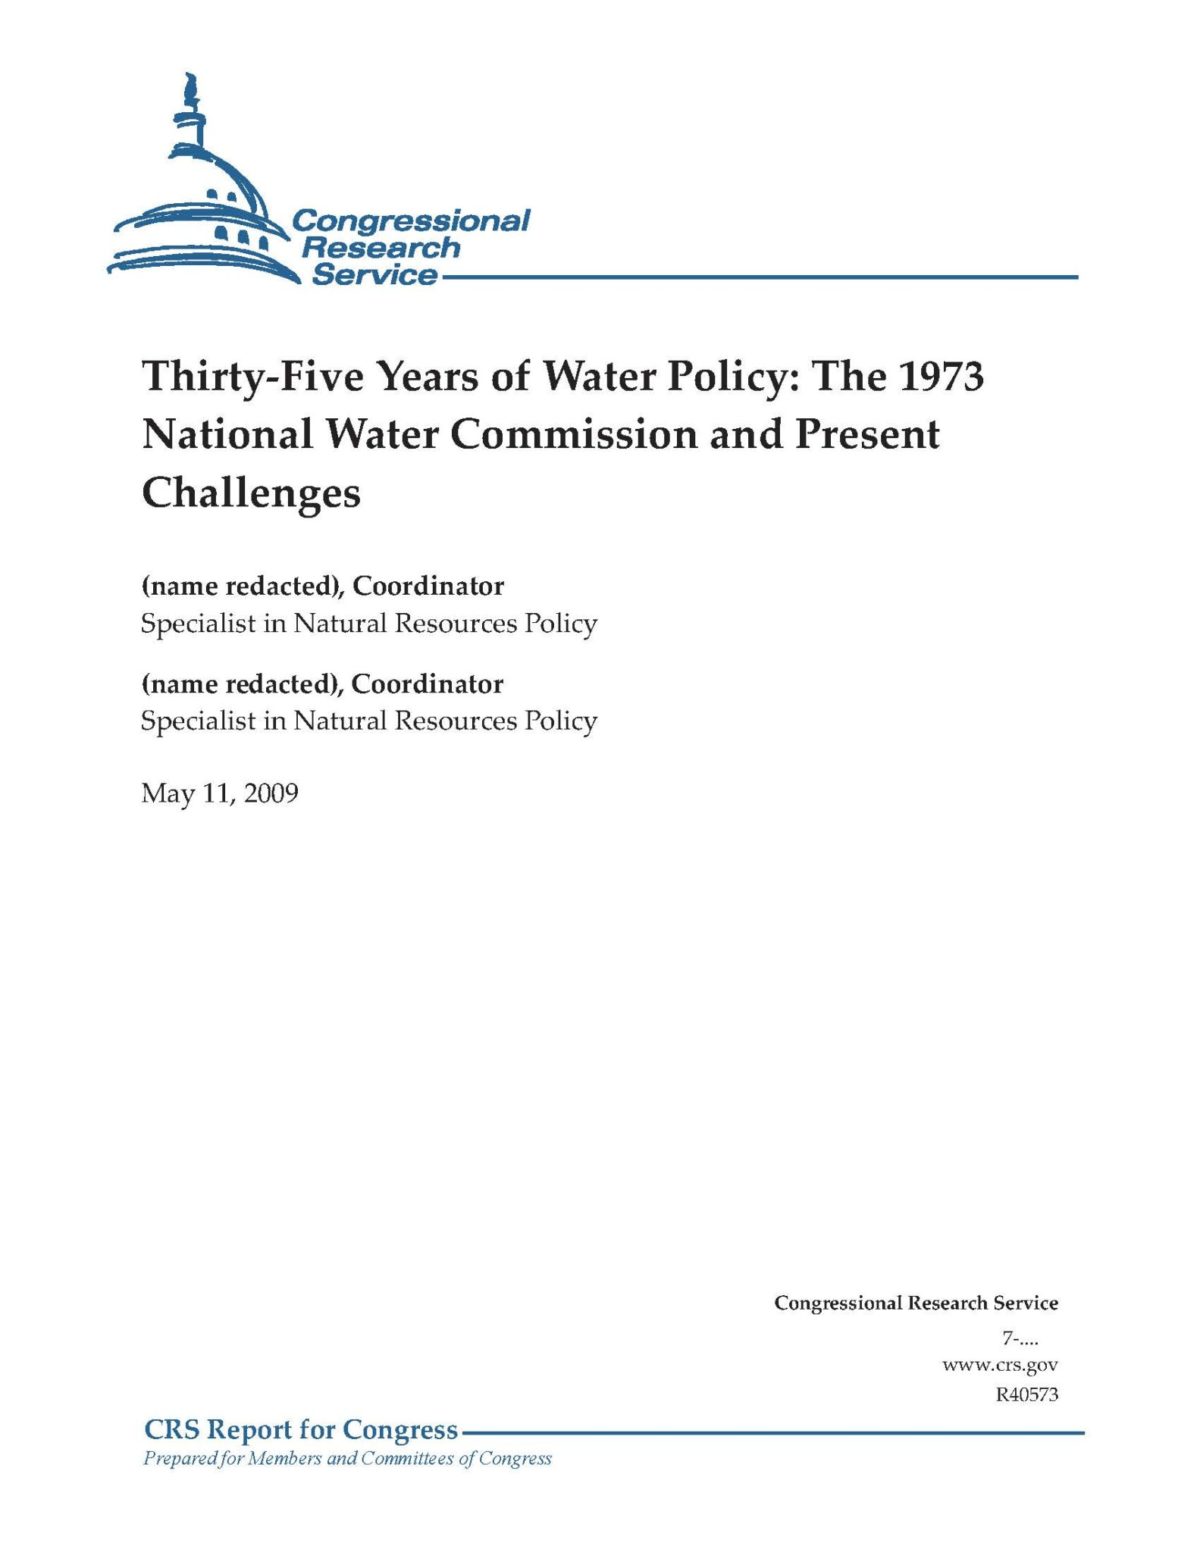 Thirty-Five Years of Water Policy: The 1973 National Water Commission and Present Challenges